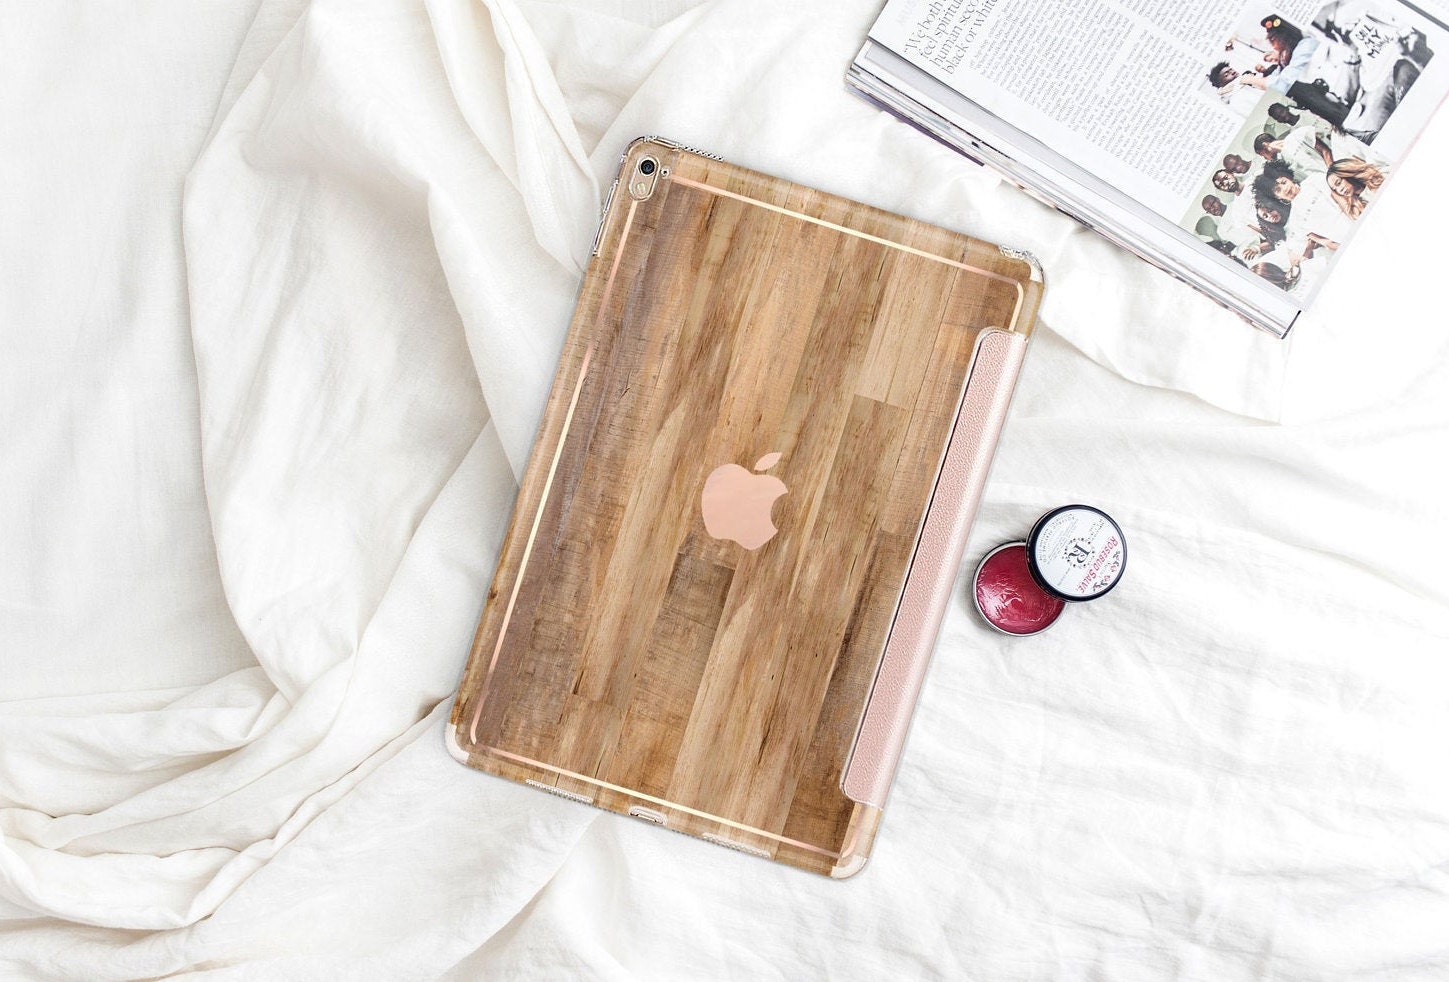 Rustic Wood With Rose Gold Smart Cover Hard Case . Ipad Pro - Etsy